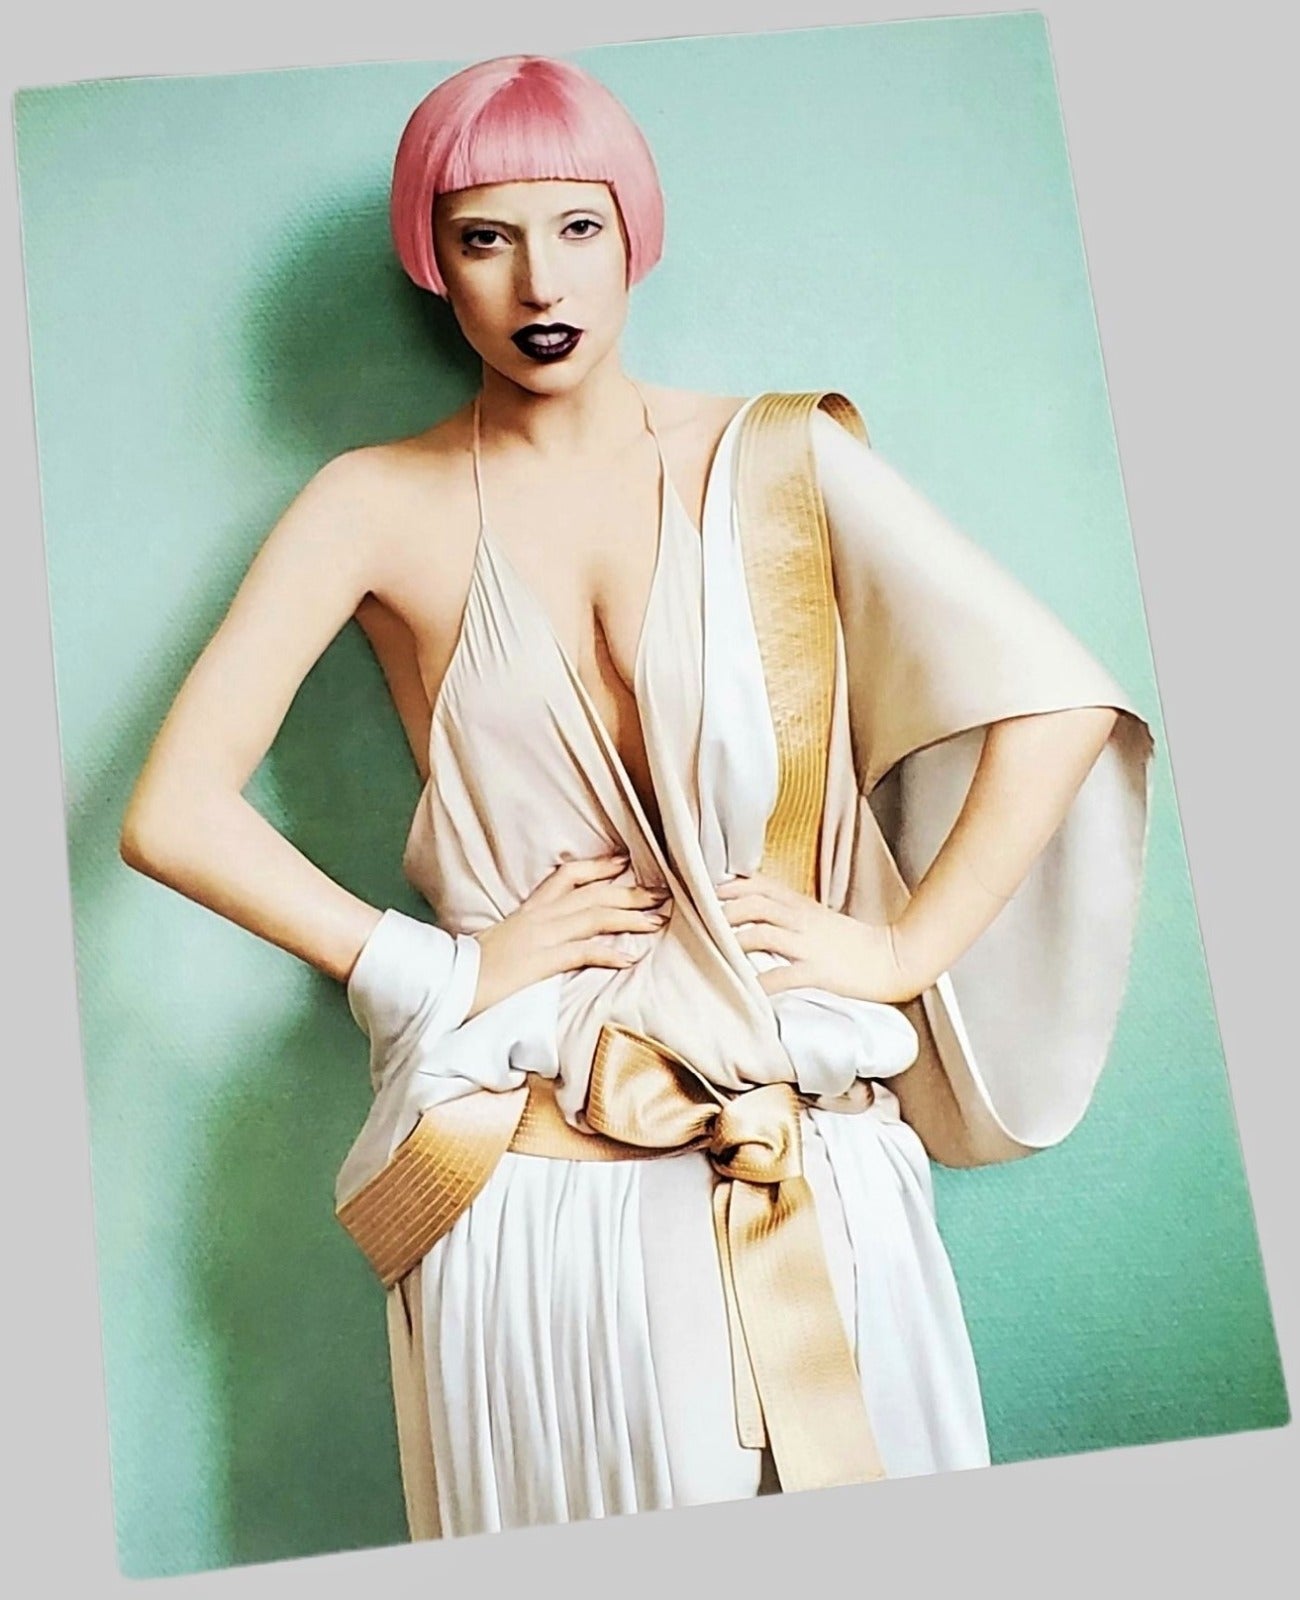 Lady Gaga photograph Vogue March 2011. Photograph page featured in Vogue x Music book  available in area51gallery